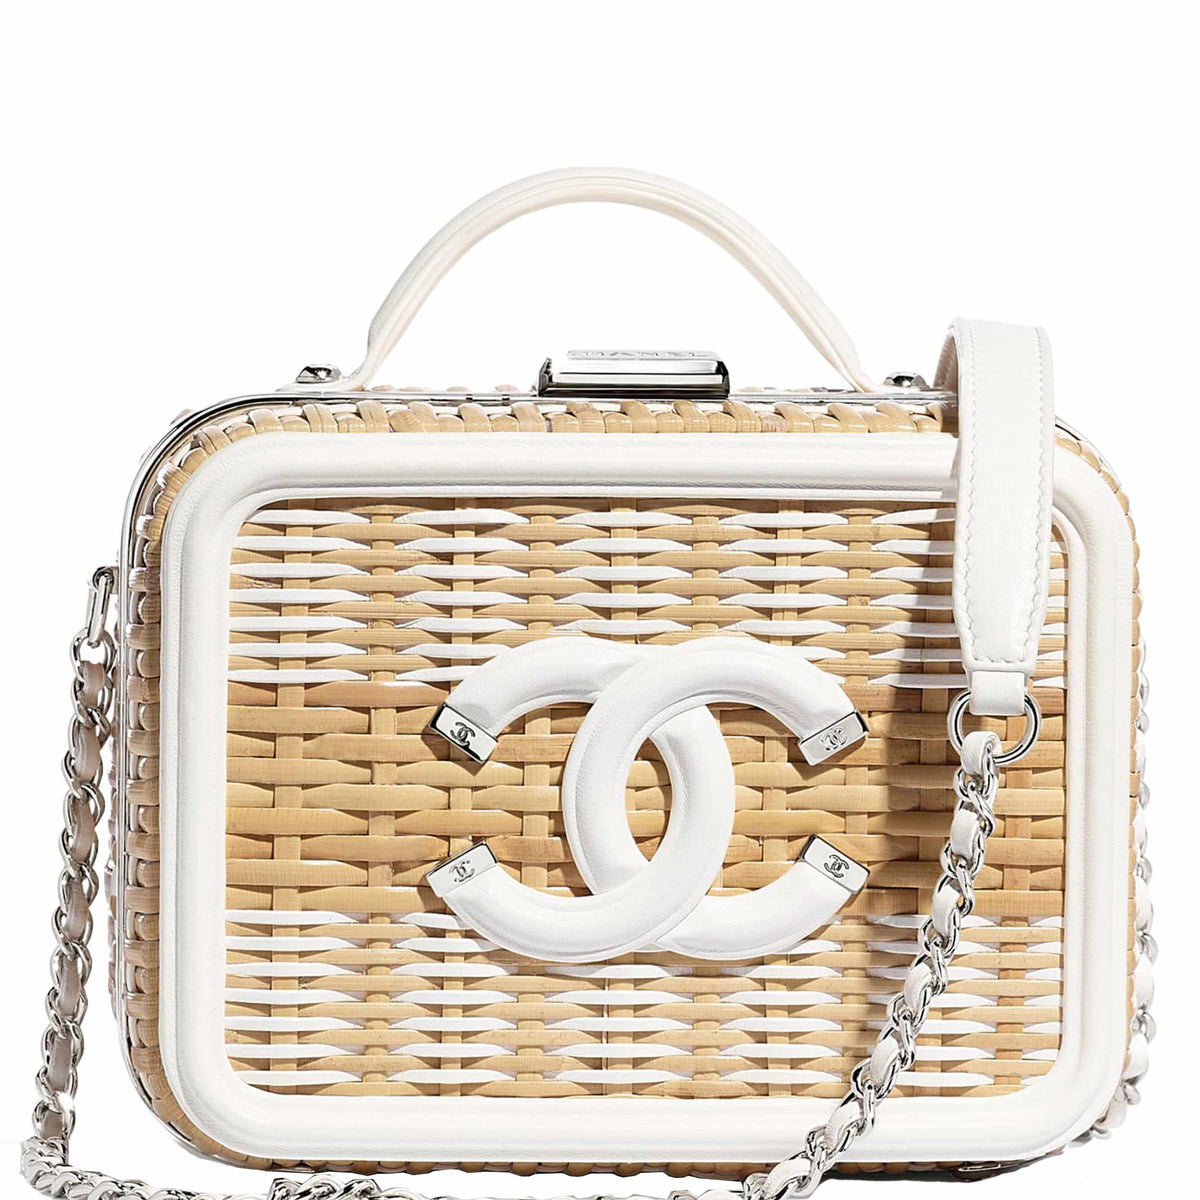 Chanel Chanel Vanity Case 17 Fixed Size buy in United States with